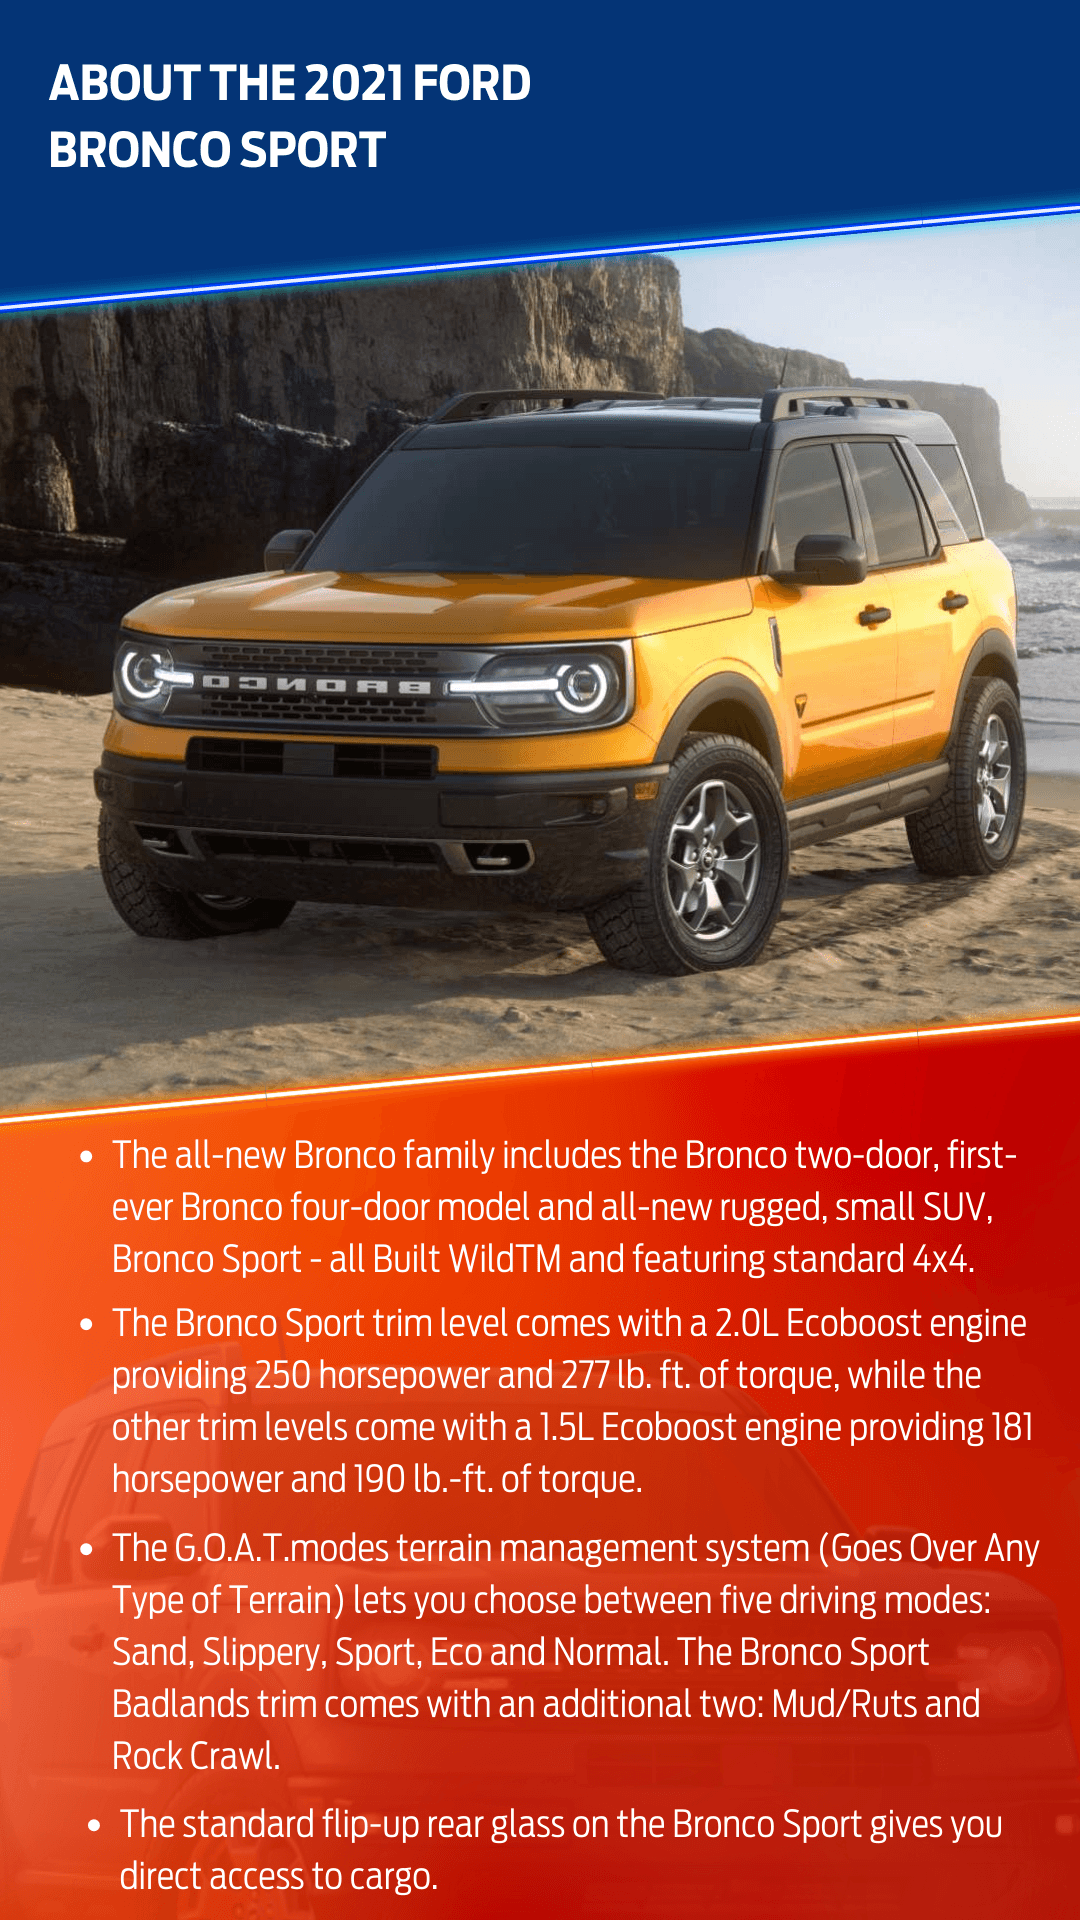 About Bronco SPORT